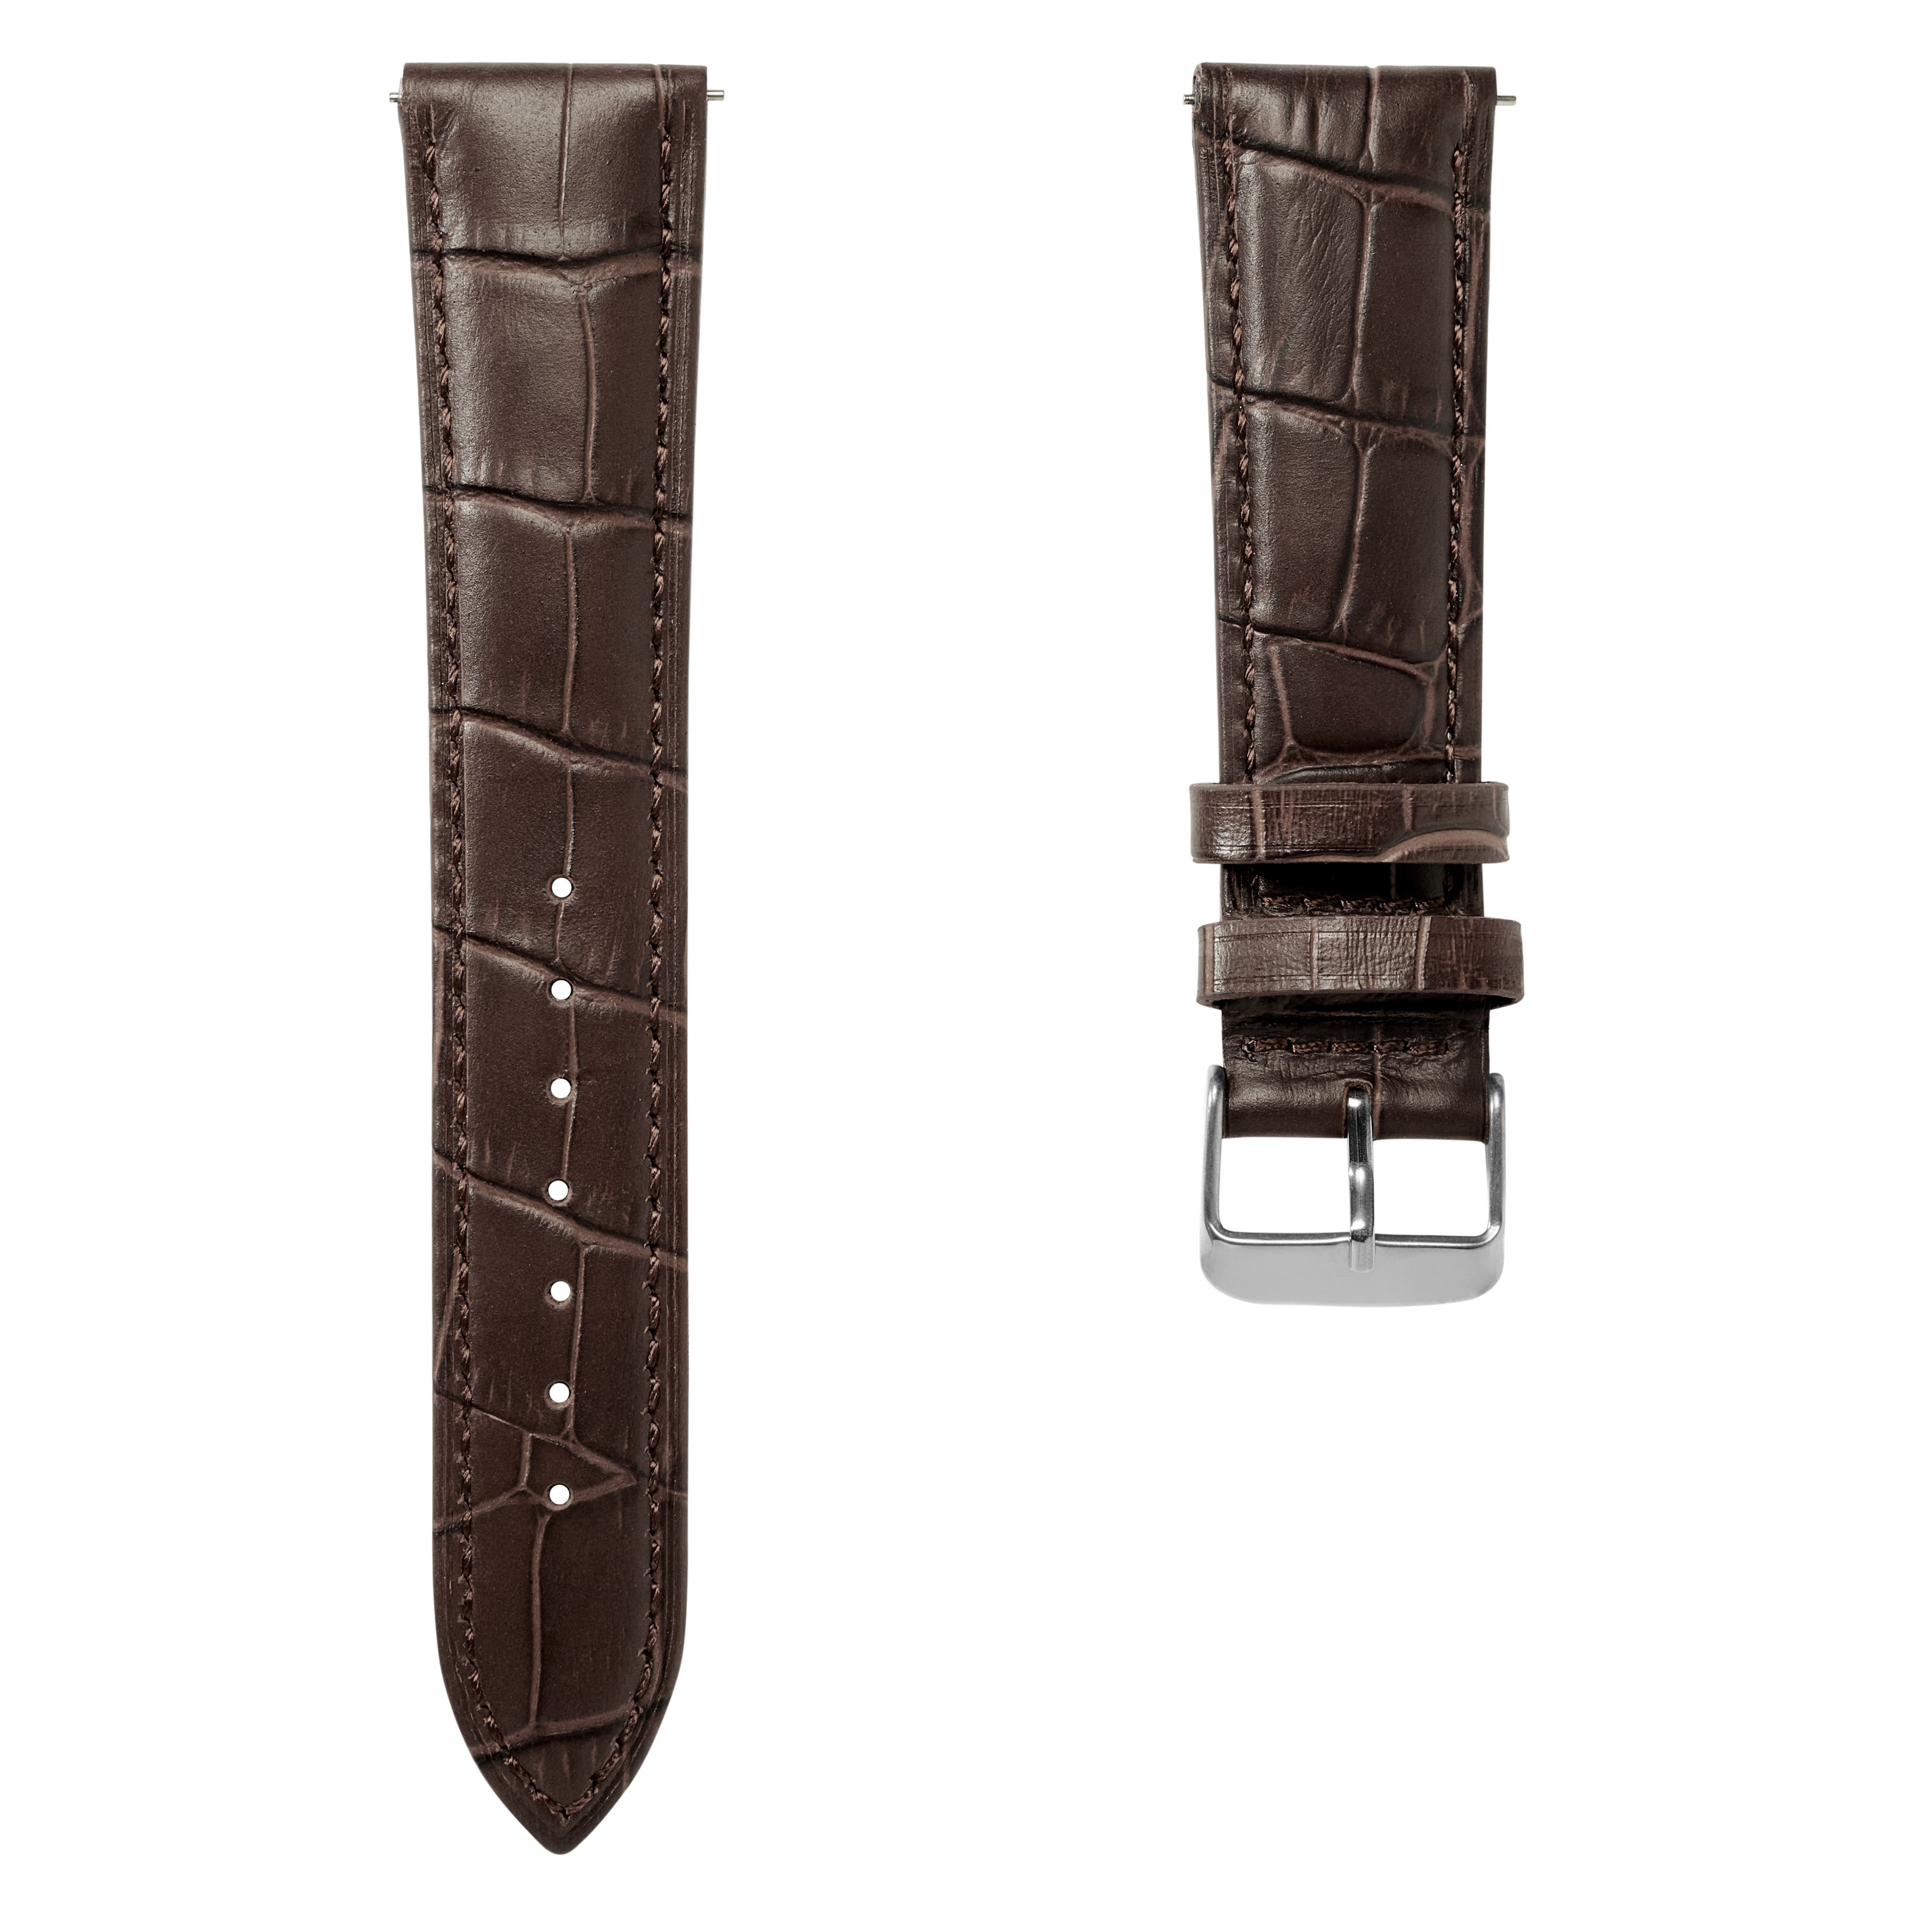 21mm Crocodile-Embossed Dark-Brown Leather Watch Strap with Silver-Tone Buckle – Quick Release